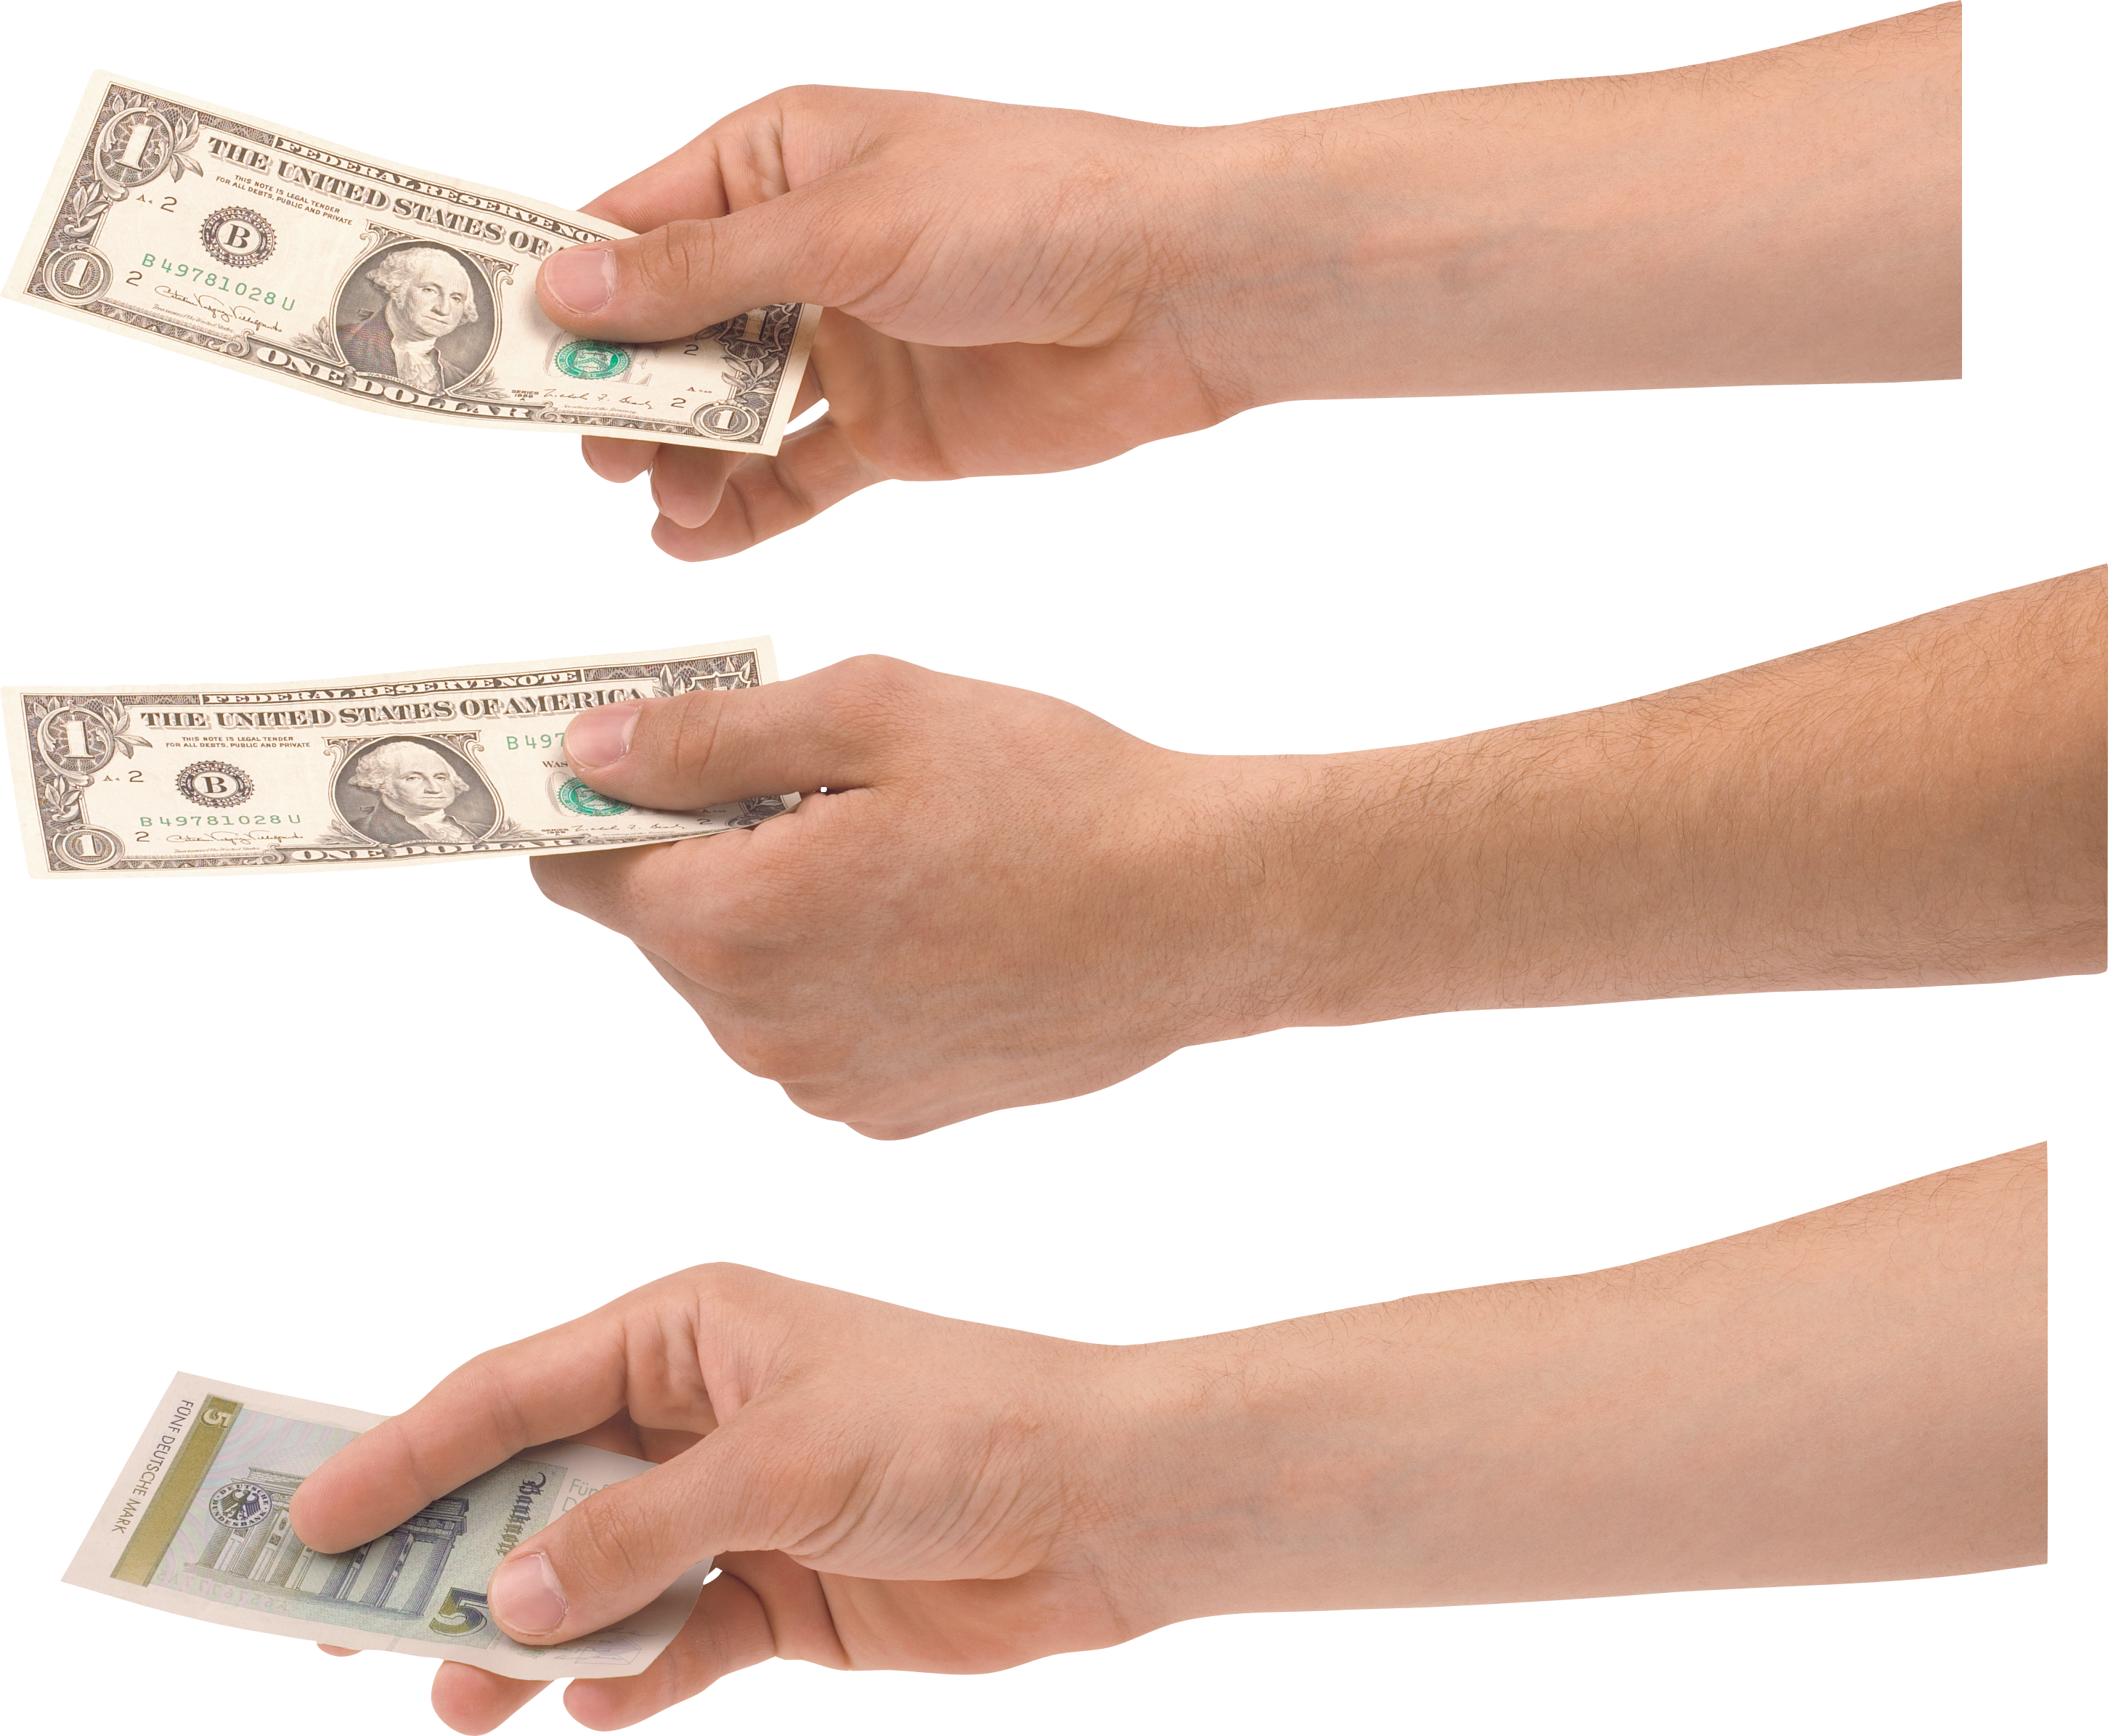 Money dollars in hand PNG image